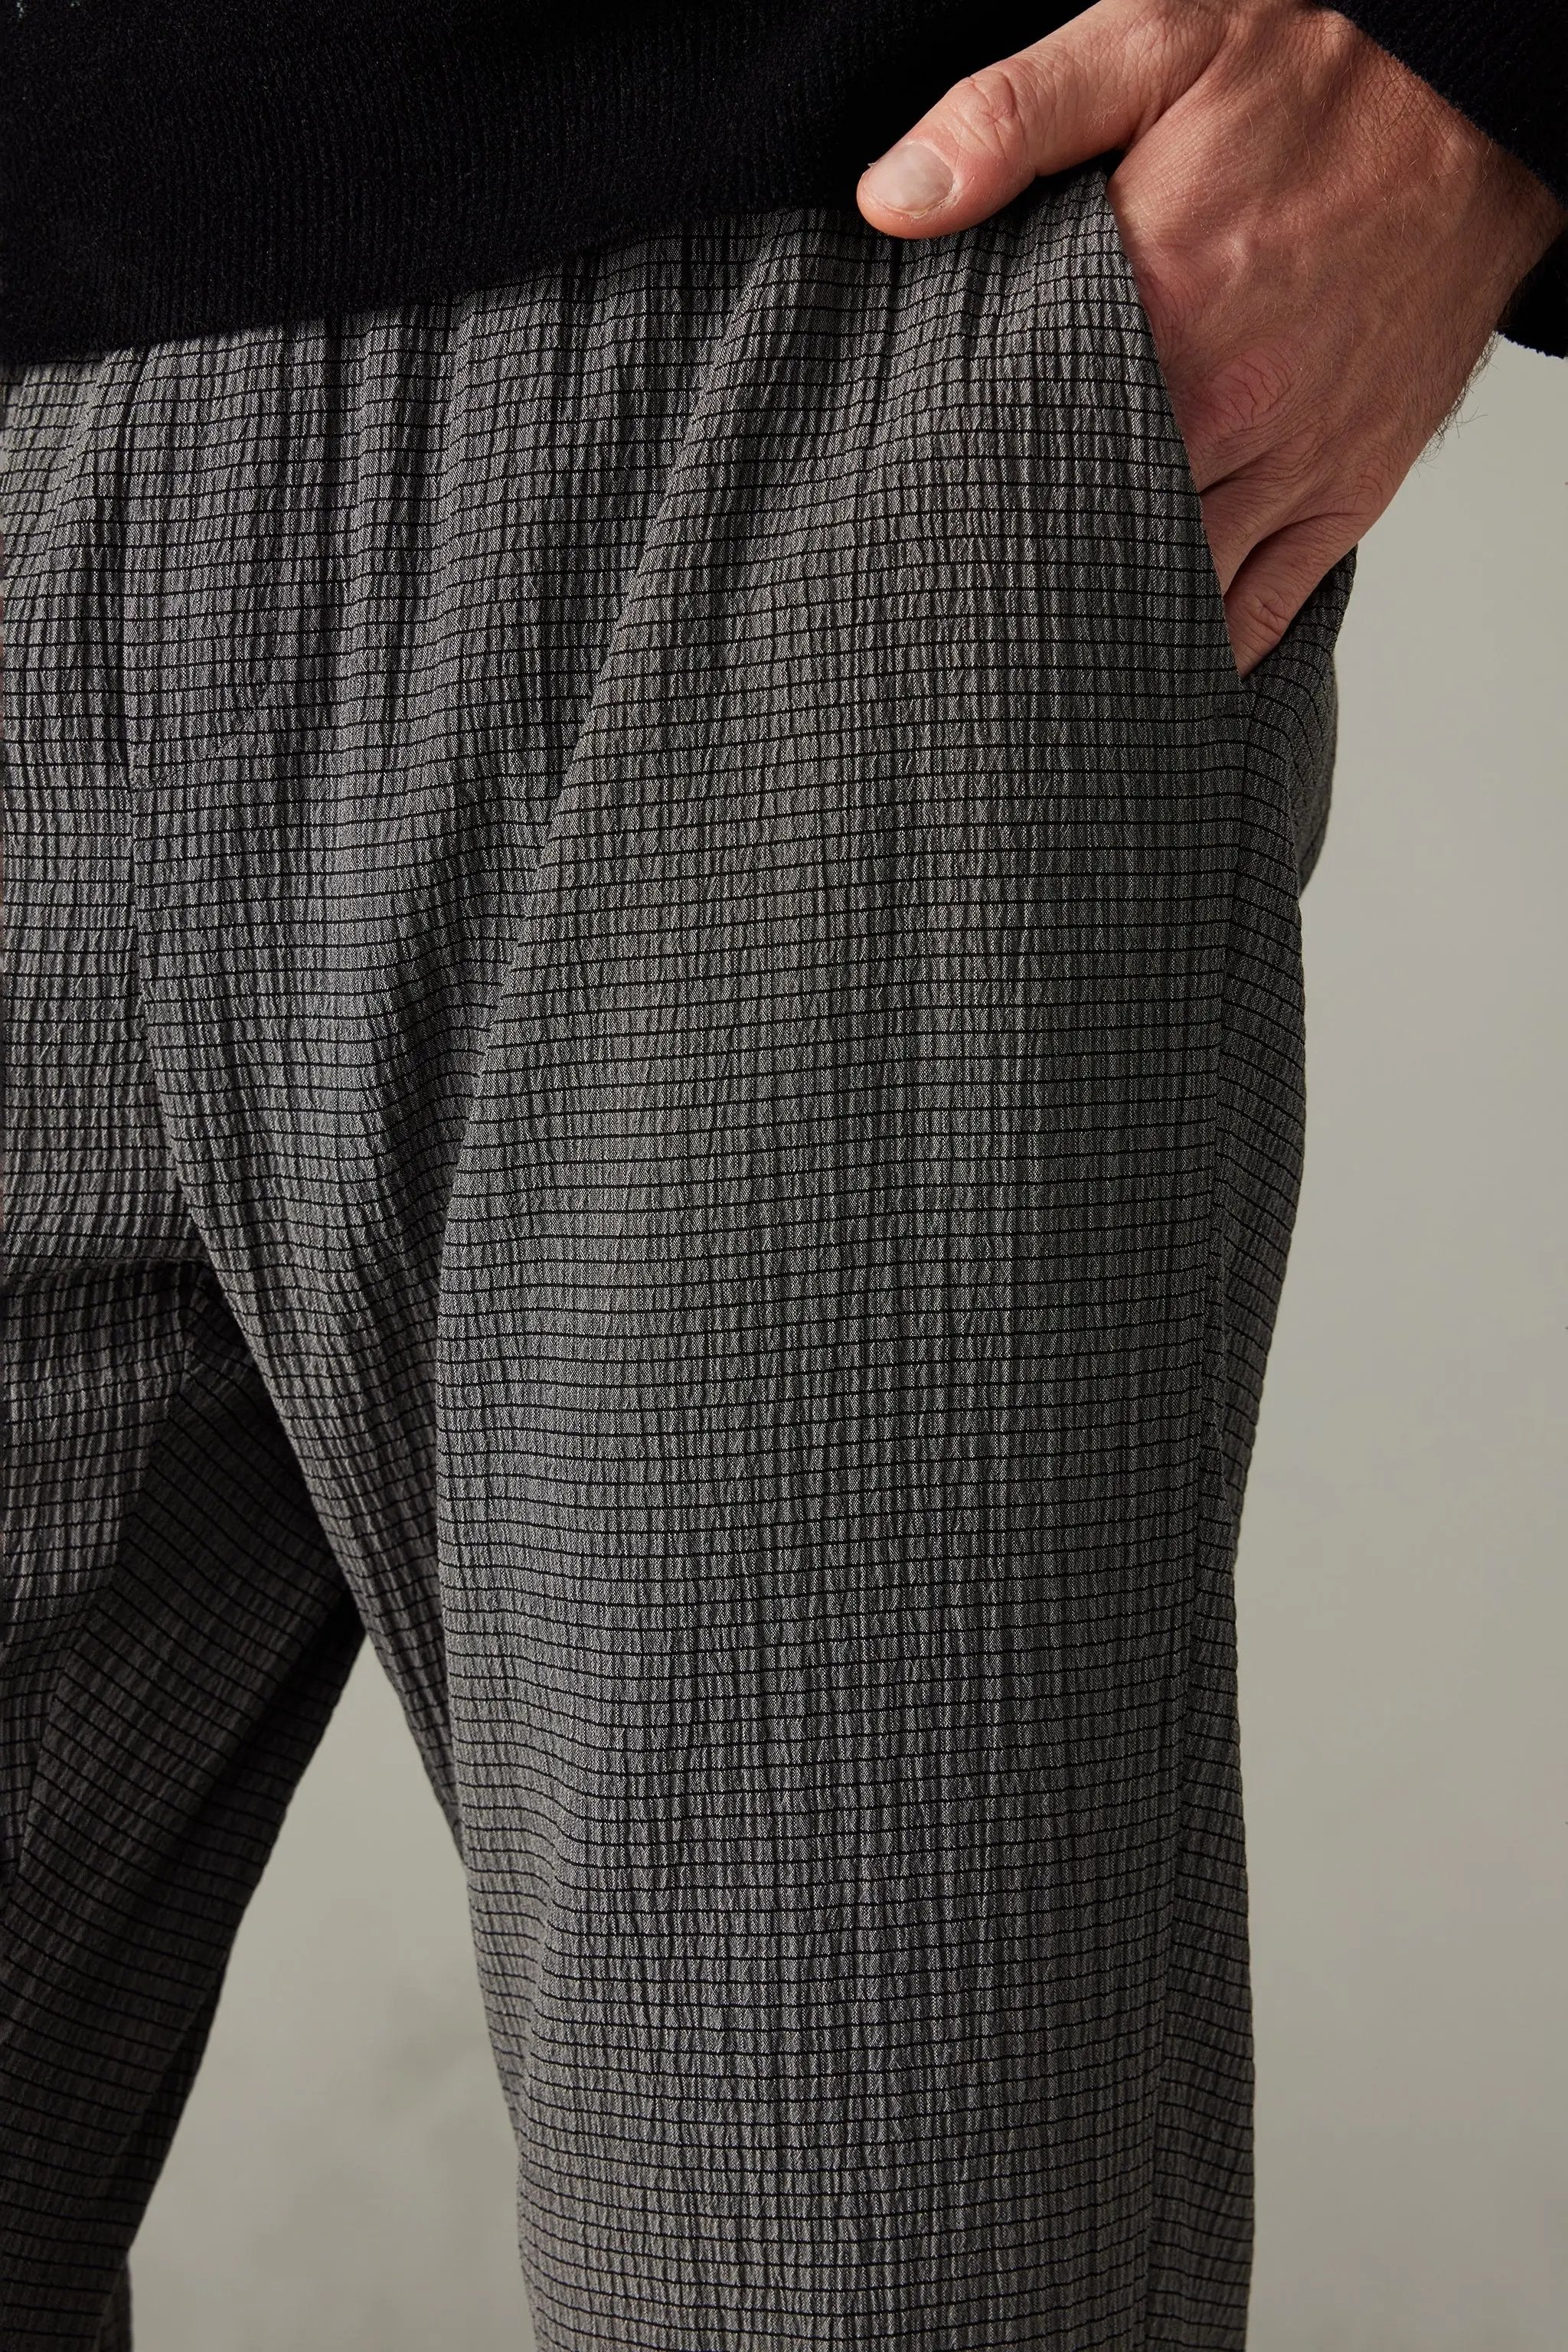 a close up of a person's pants with a black sweater on